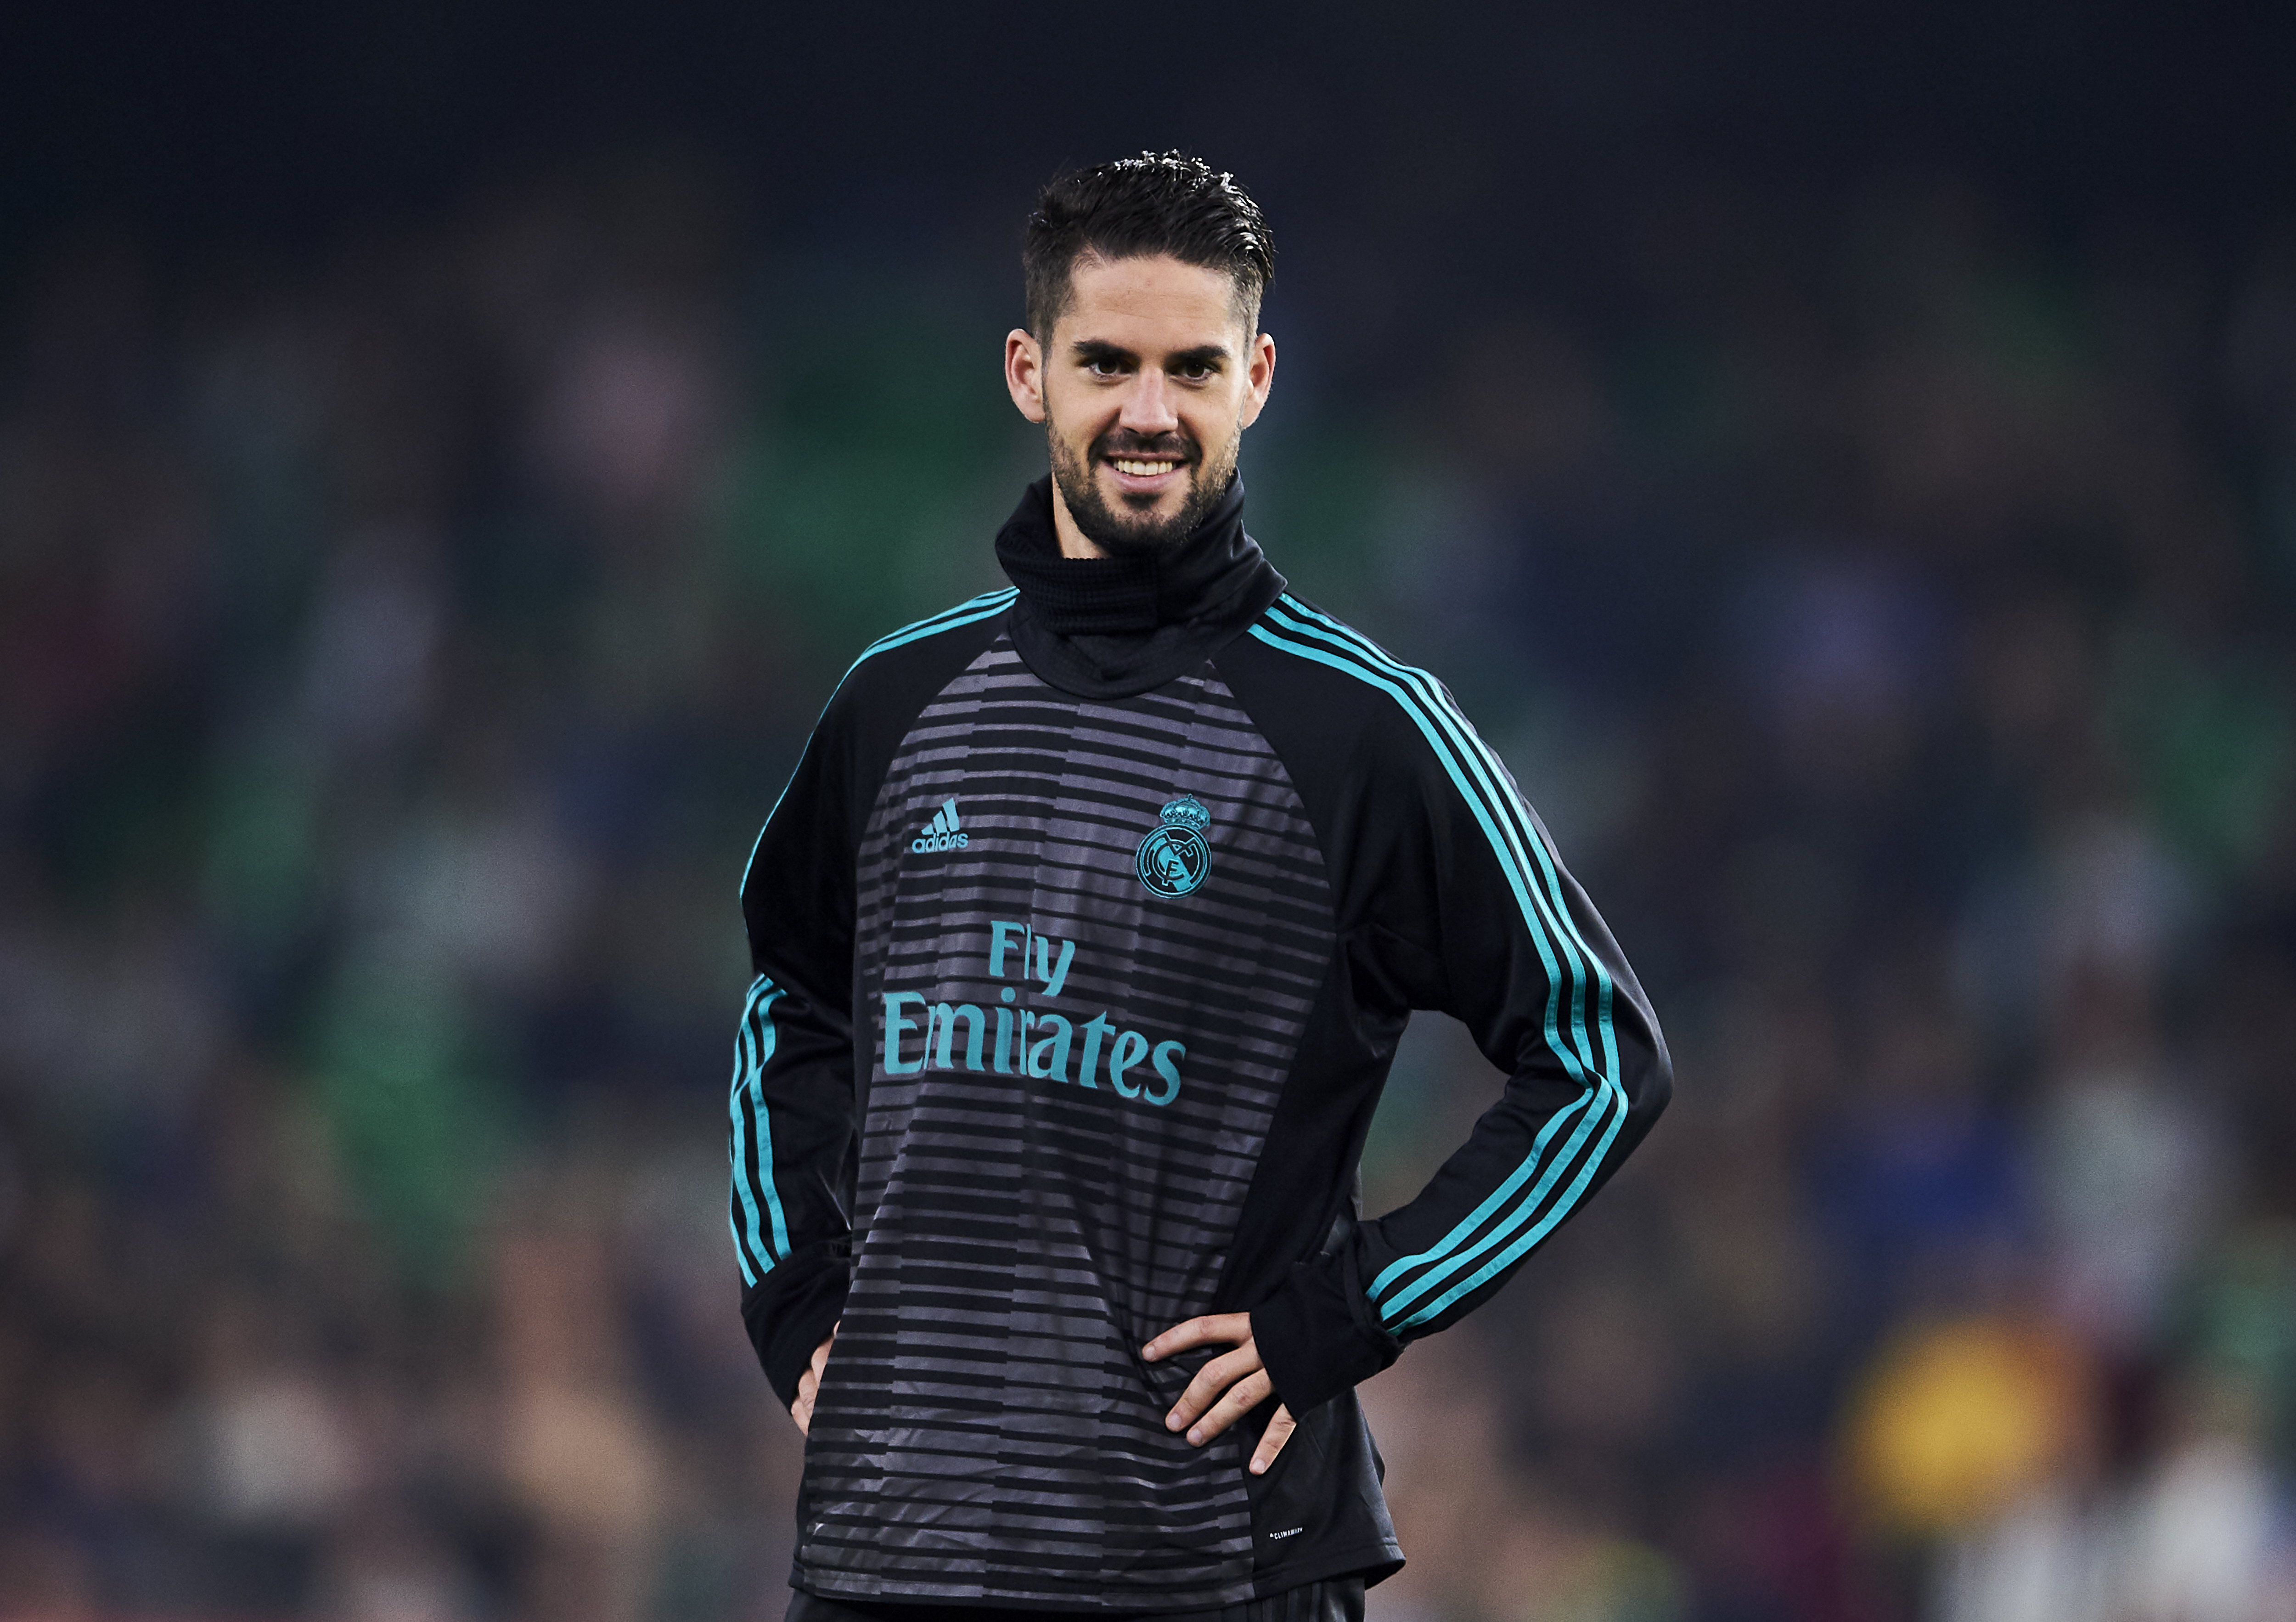 SEVILLE, SPAIN - FEBRUARY 18: Isco Alarcon of Real Madrid looks on during a Real Madrid training session prior to the La Liga match between Real Betis and Real Madrid at Benito Villamrin stadium on February 18, 2018 in Seville, Spain.  (Photo by Aitor Alcalde/Getty Images)